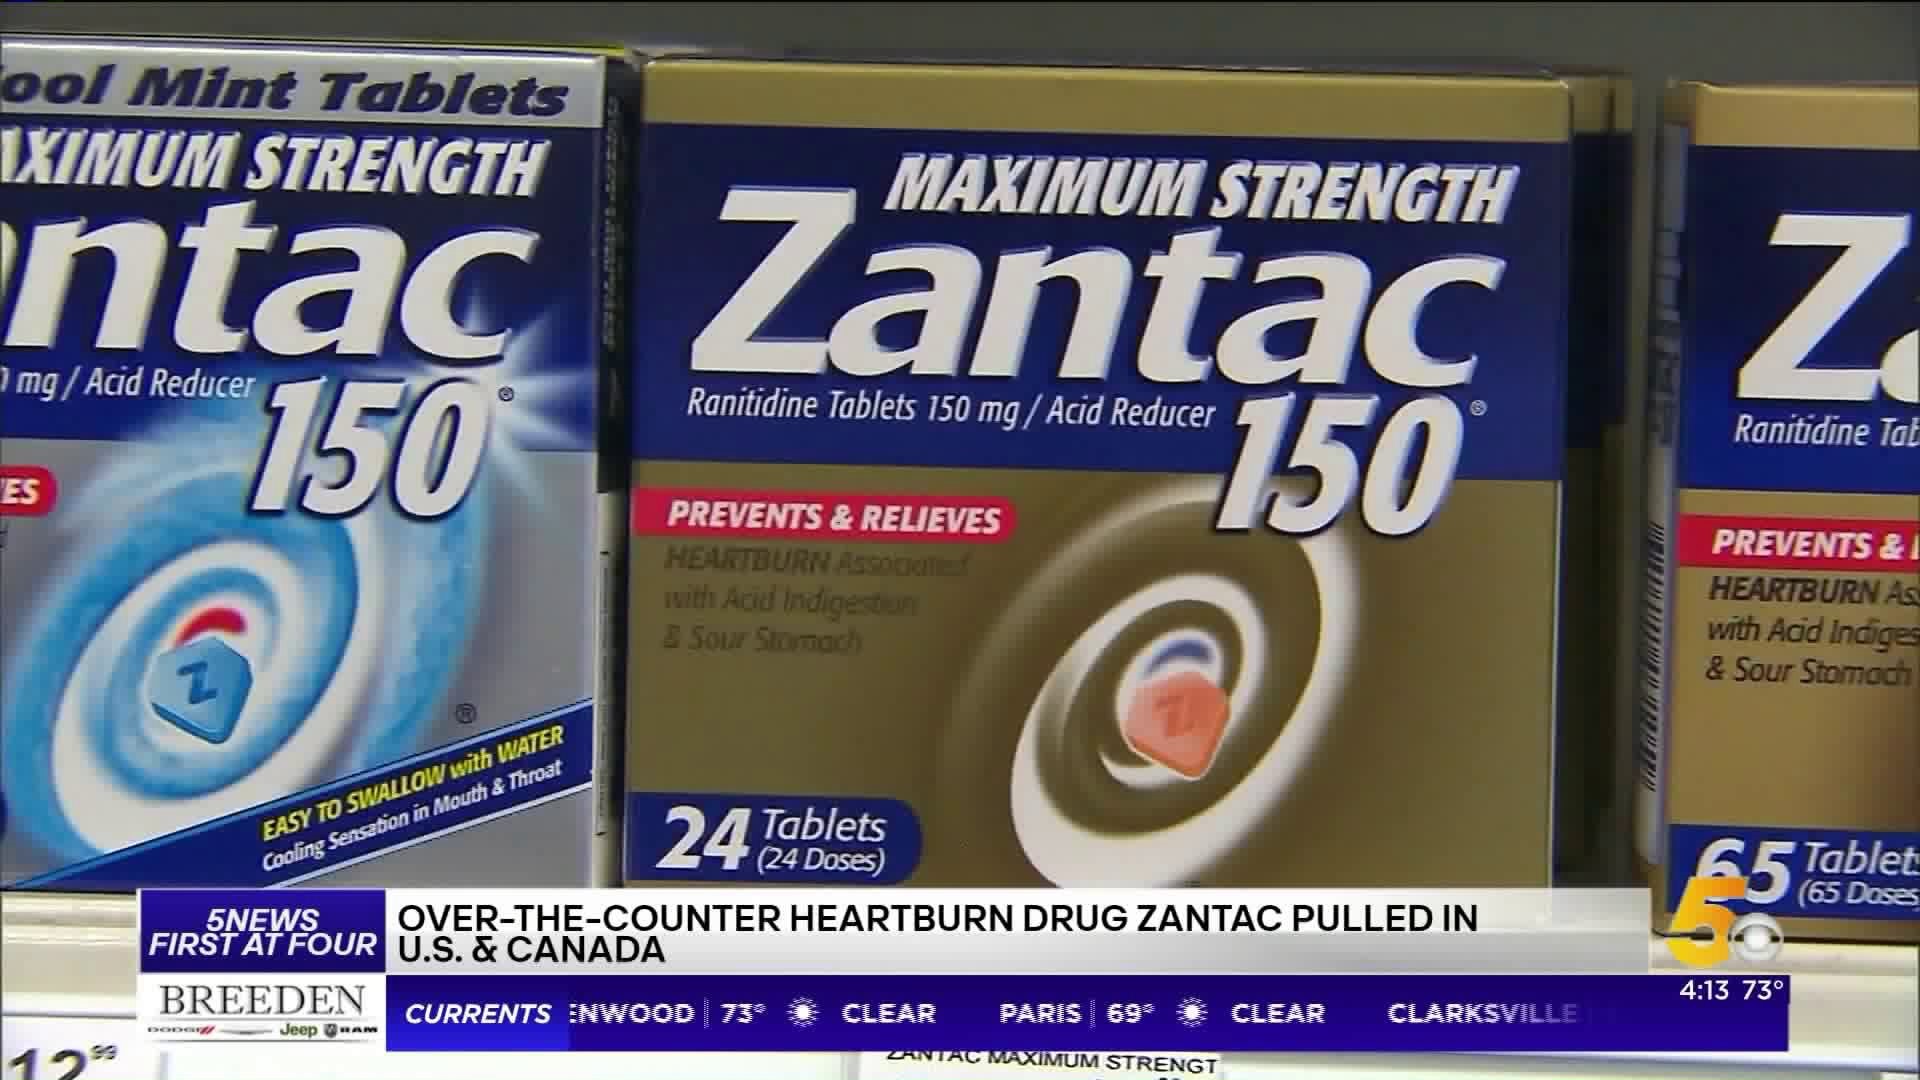 Over-The-Counter Heartburn Drug Zantac Pulled In US, Canada